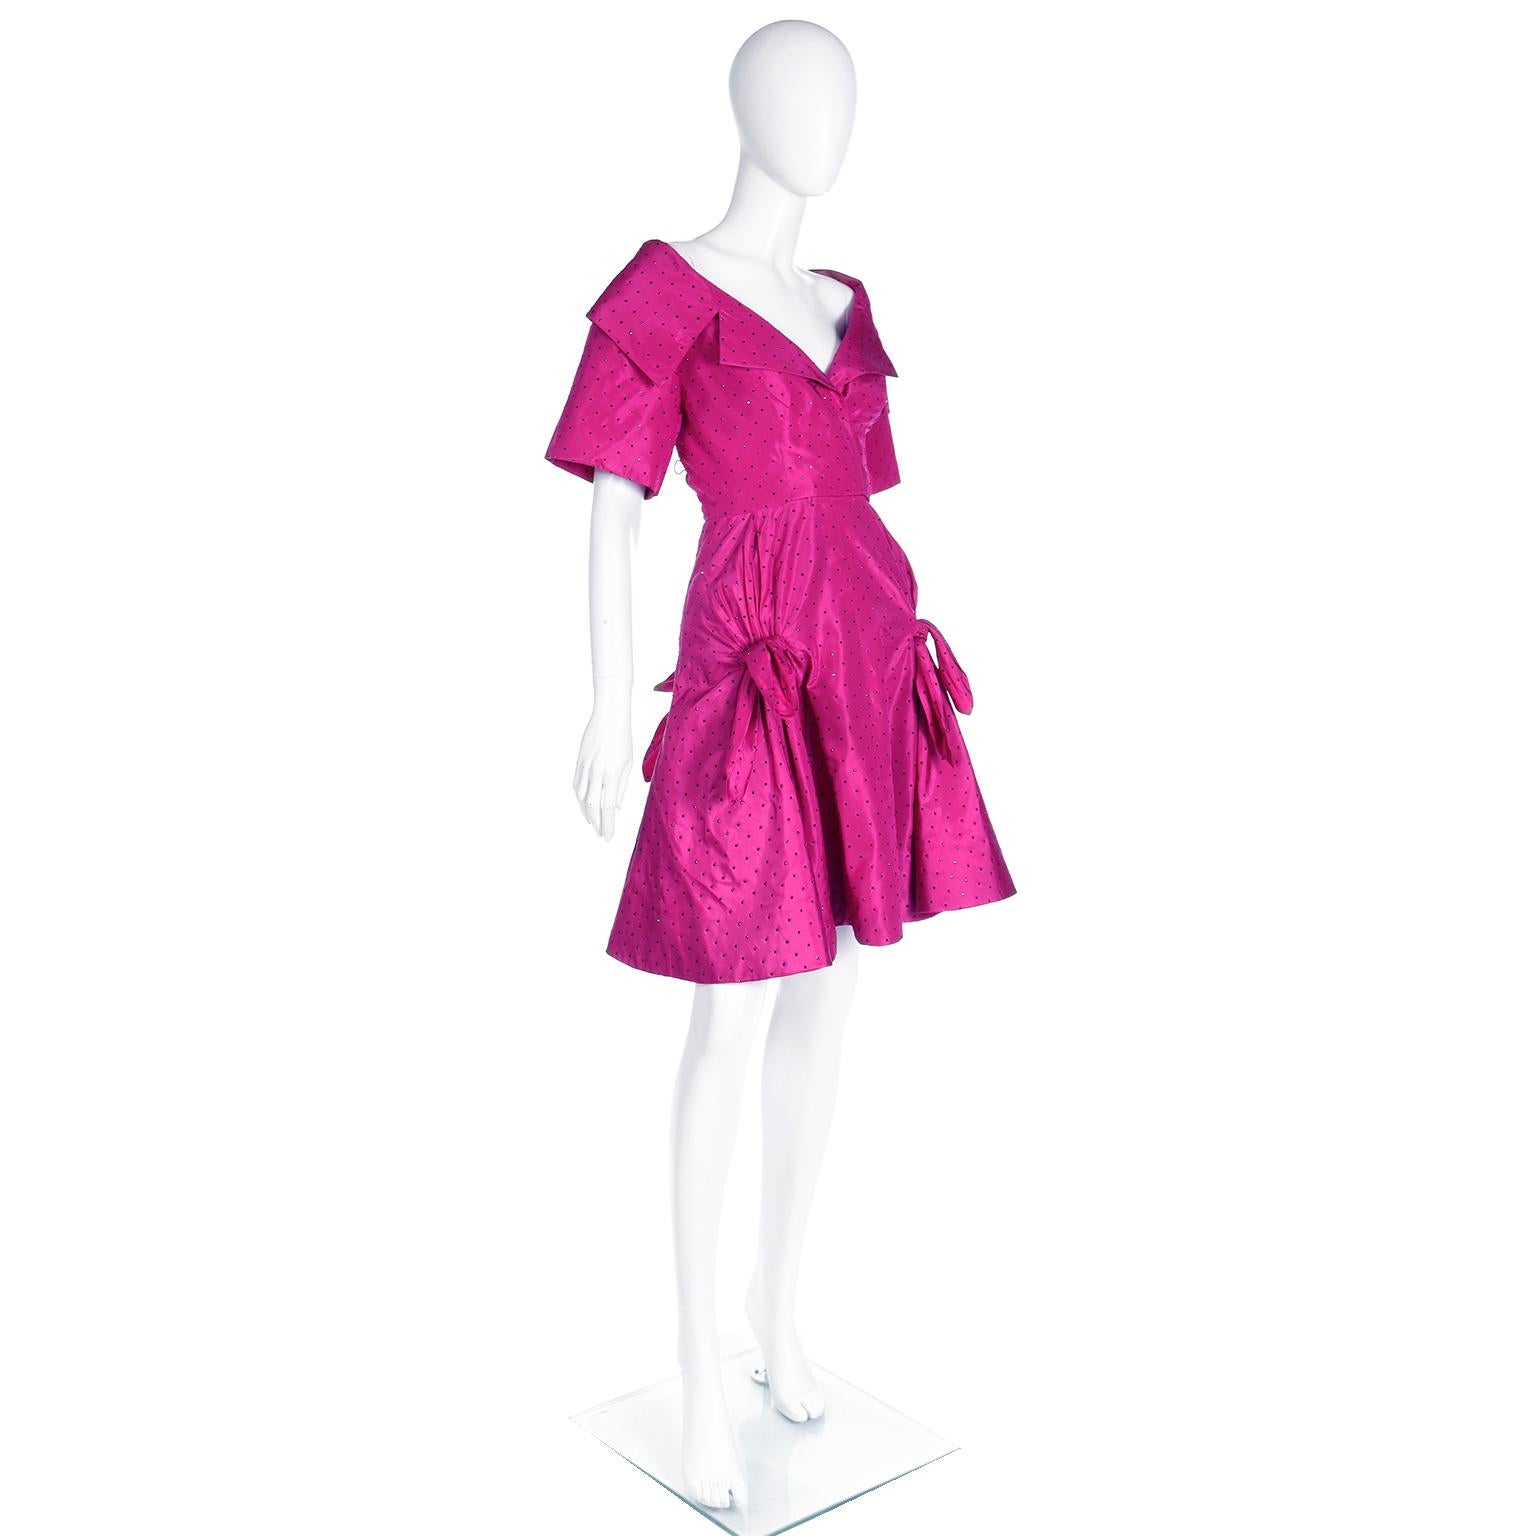 Christian Dior Couture 1987 Magenta Evening Dress w Crystals by Marc Bohan For Sale 8